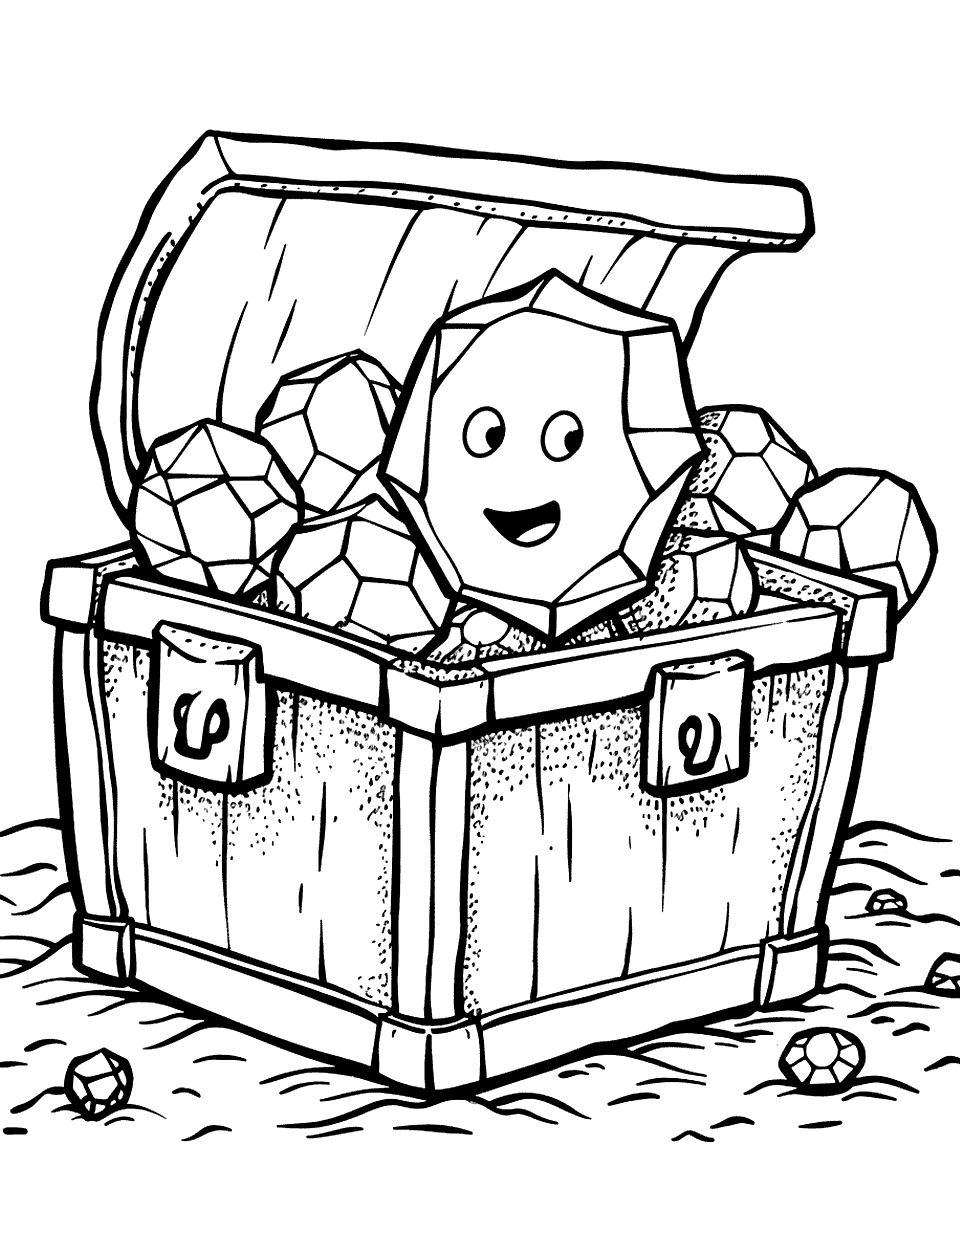 Diamond Delight Shapes Coloring Page - A treasure chest filled with sparkling diamonds.